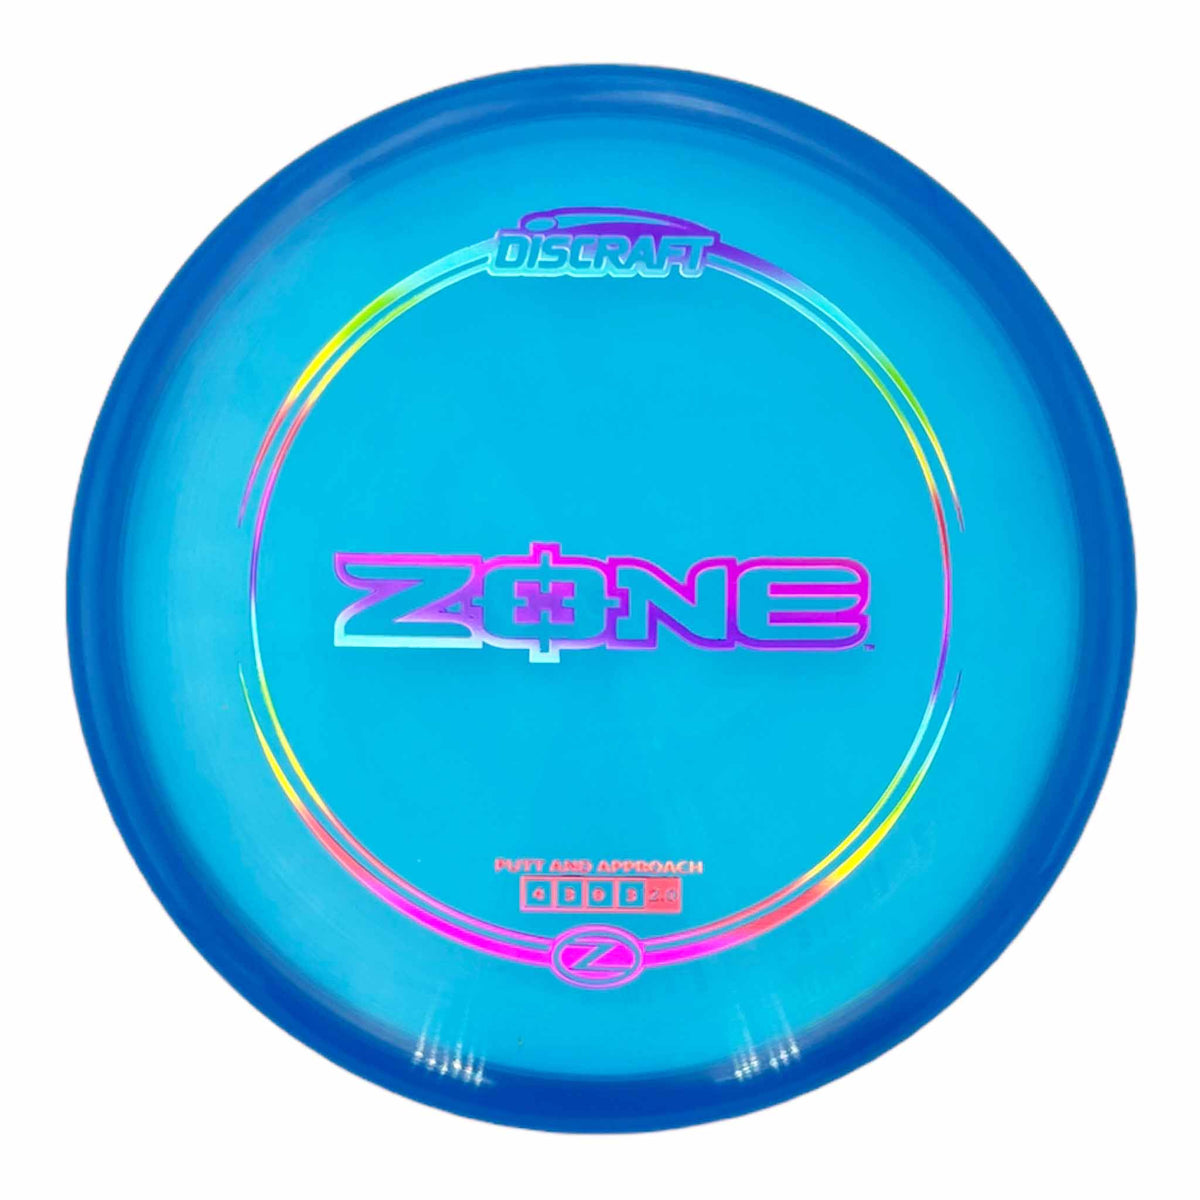 Discraft Z Line Zone putter and approach